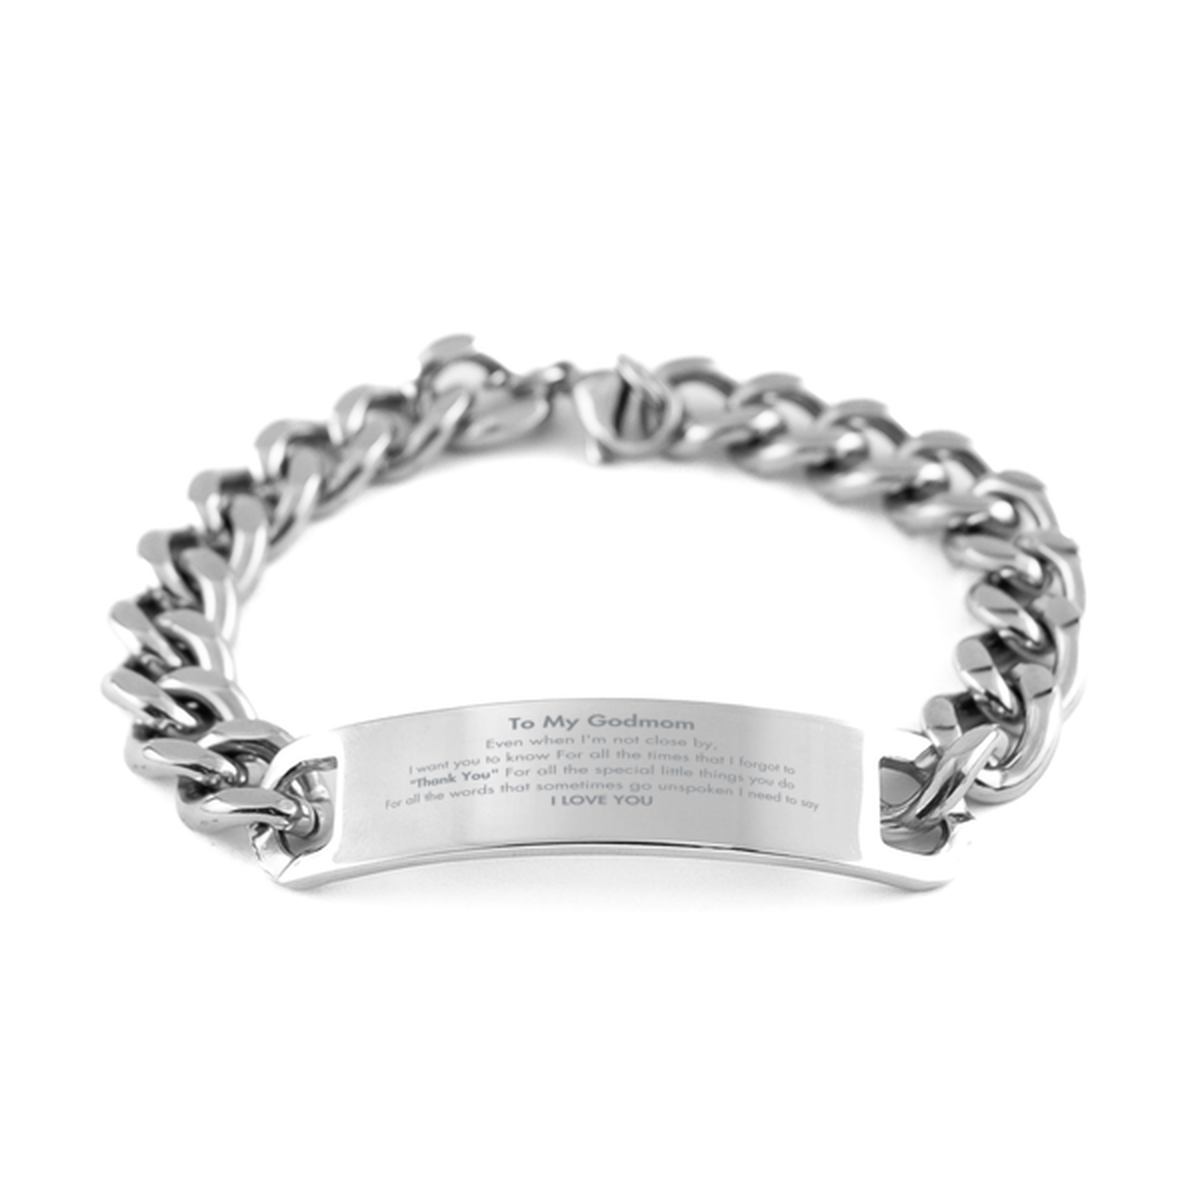 Thank You Gifts for Godmom, Keepsake Cuban Chain Stainless Steel Bracelet Gifts for Godmom Birthday Mother's day Father's Day Godmom For all the words That sometimes go unspoken I need to say I LOVE YOU